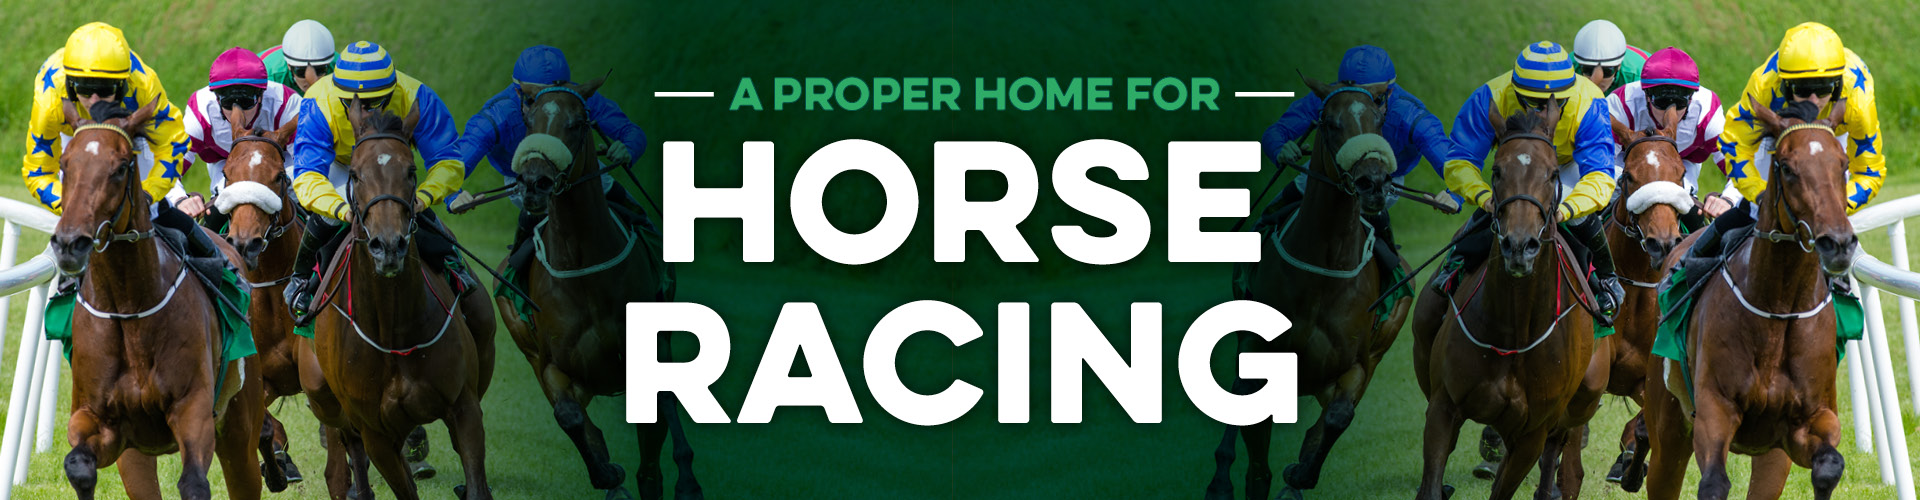 Watch horse racing live at North End Tavern pub